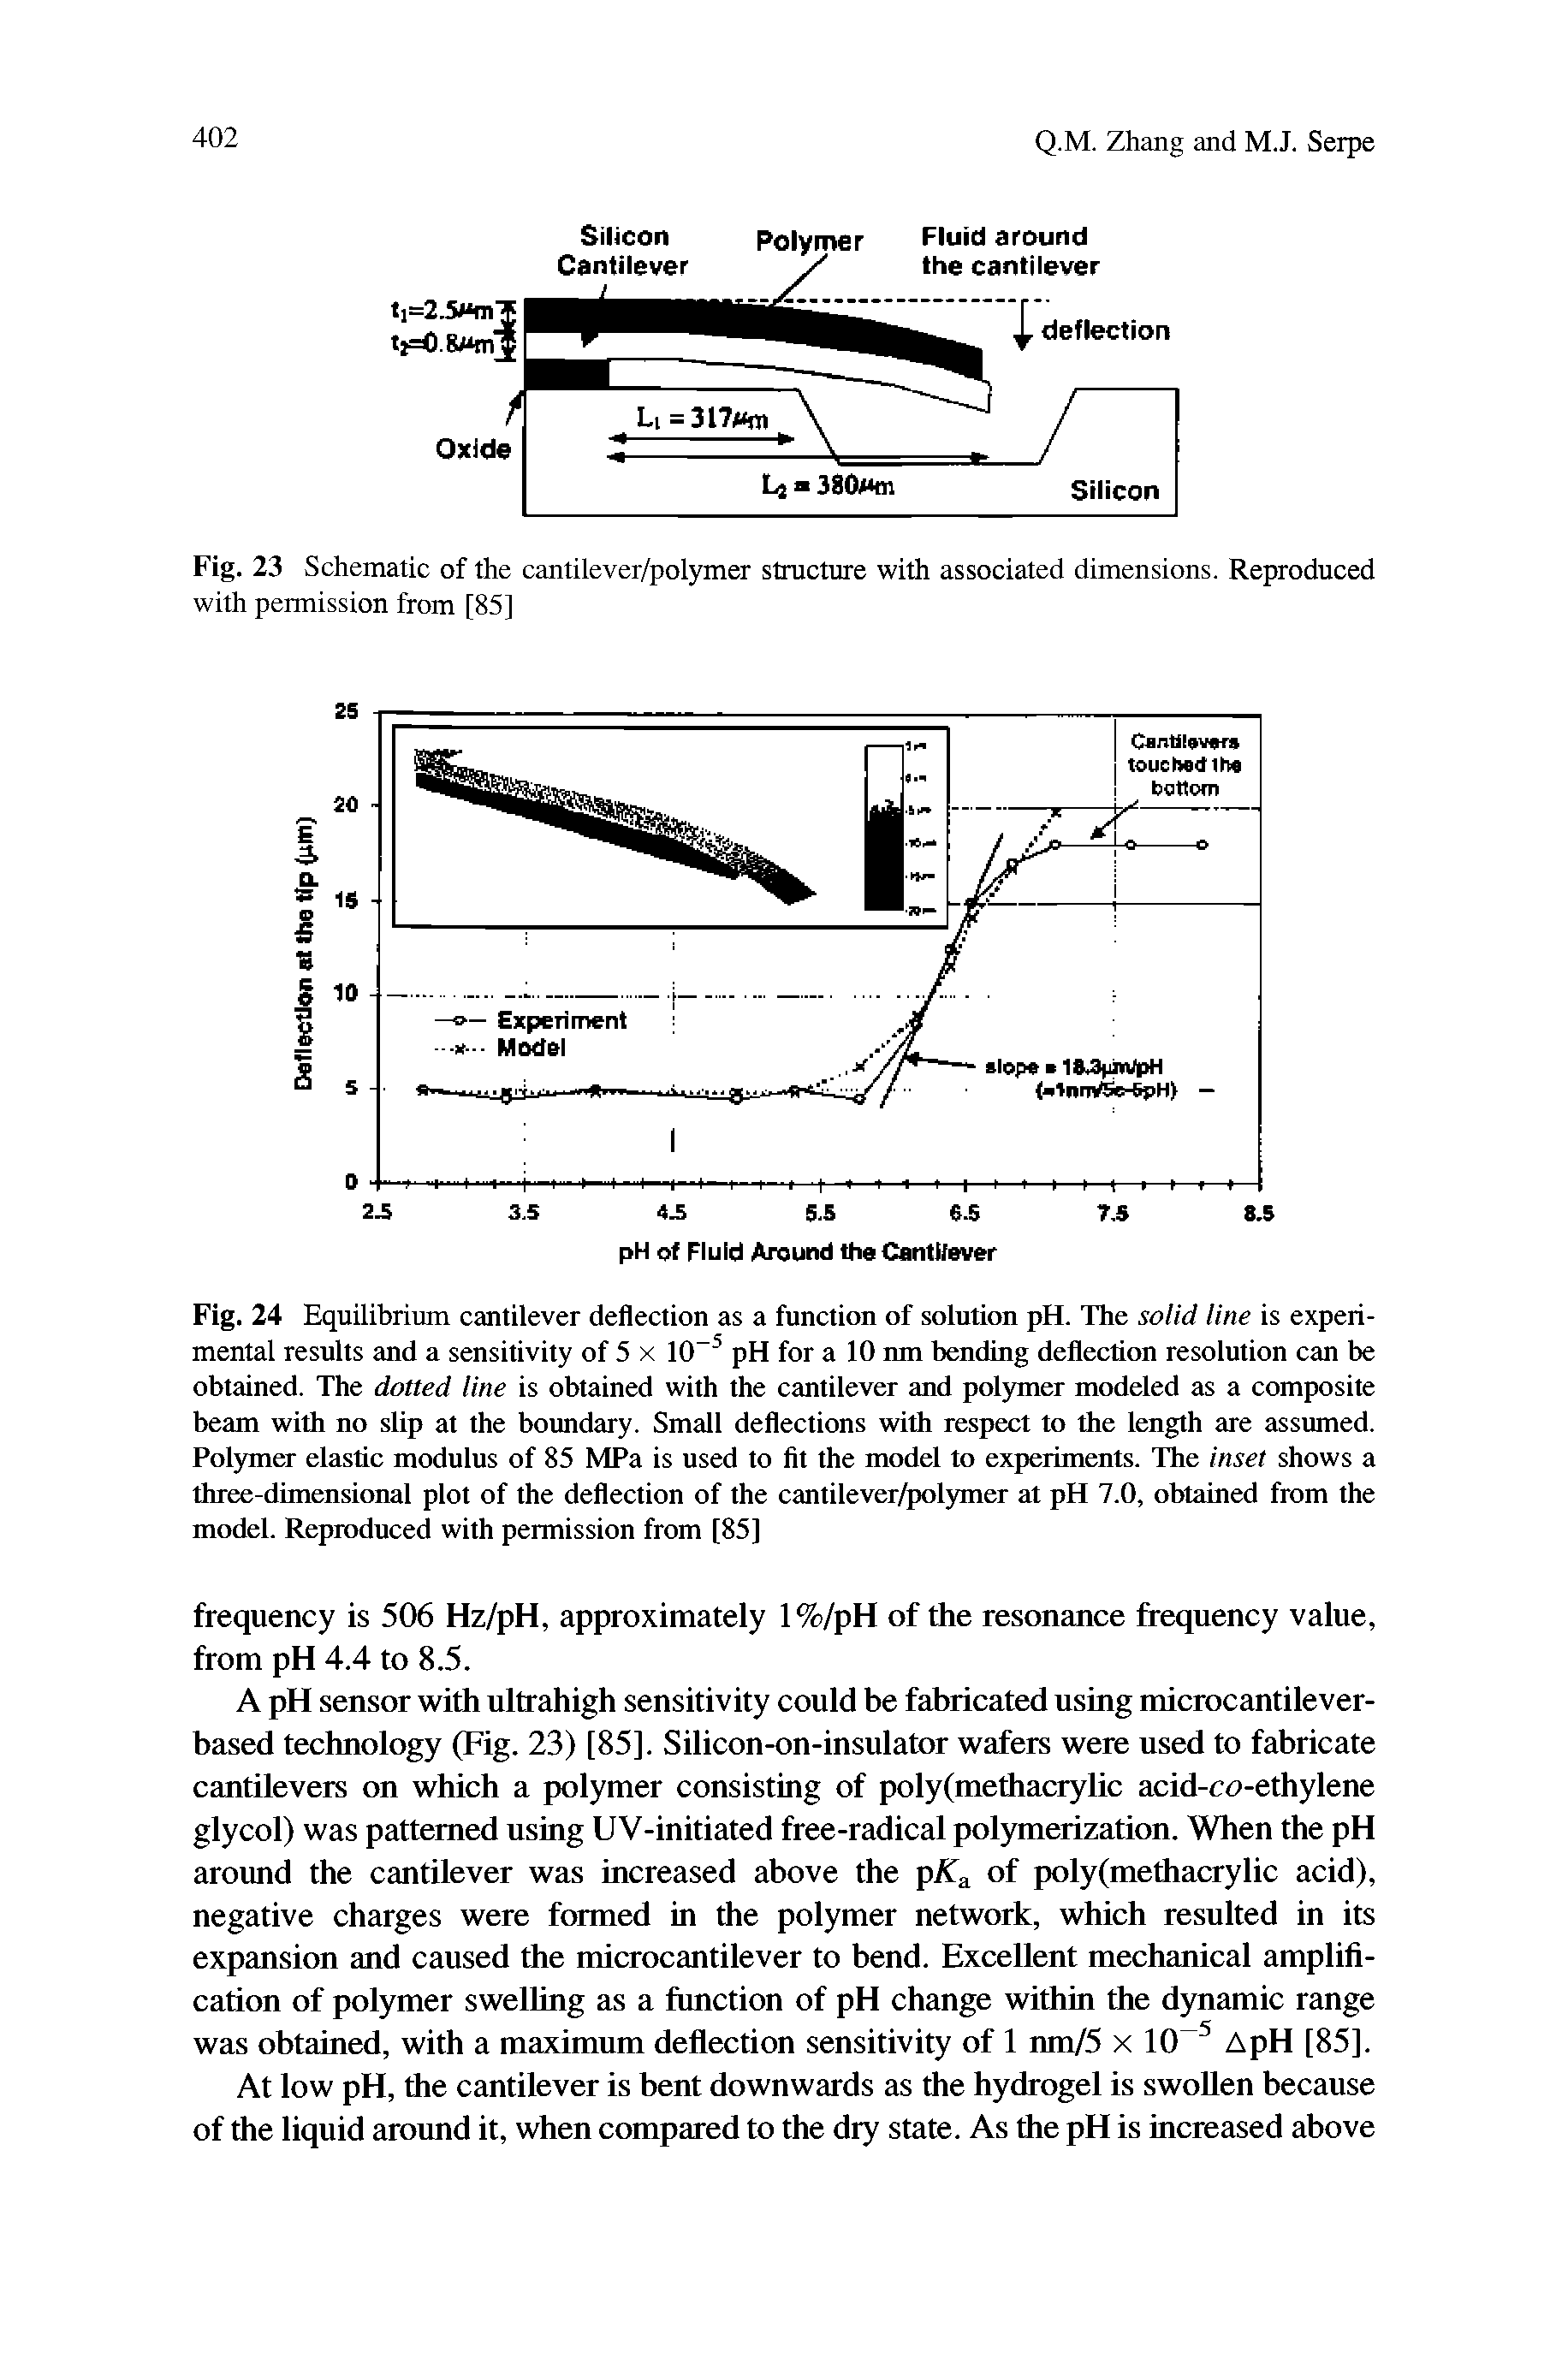 Fig. 24 Equilibrium cantilever deflection as a function of solution pH. The solid line is experimental results and a sensitivity of 5 x 10 pH for a 10 nm bending deflection resolution can be obtained. The dotted line is obtained with the cantilever and polymer modeled as a composite beam with no slip at the boundary. Small deflections with respect to the length are assumed. Polymer elastic modulus of 85 MPa is used to fit the model to experiments. The inset shows a three-dimensional plot of the deflection of the cantilever/polymer at pH 7.0, obtained from the model. Reproduced with permission from [85]...